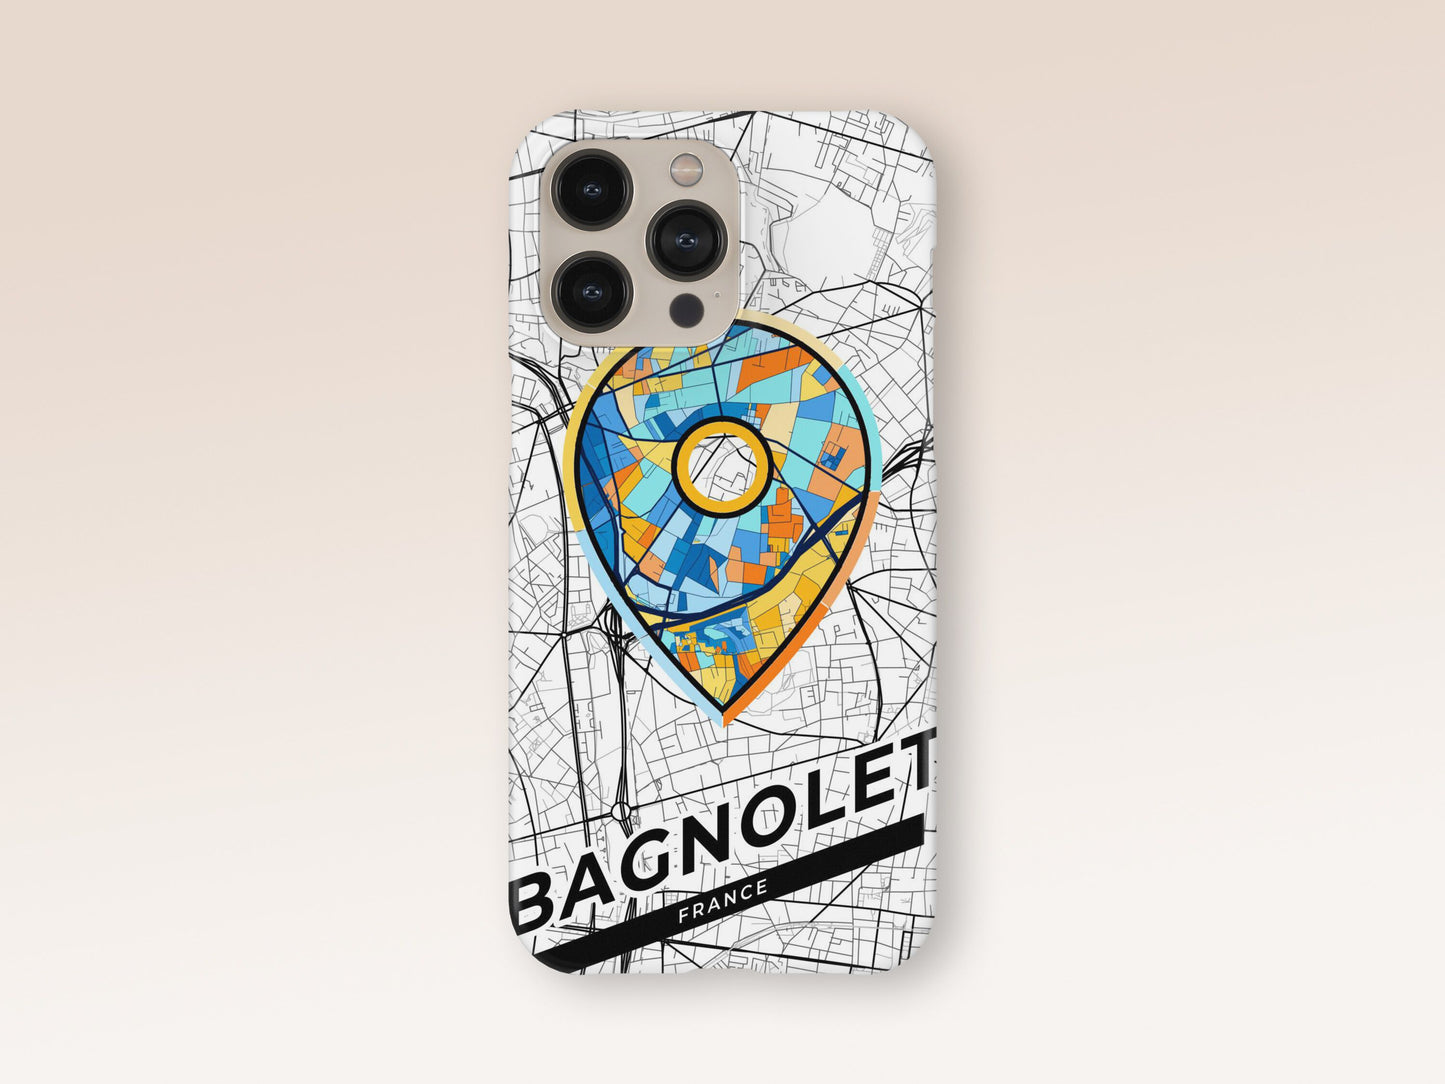 Bagnolet France slim phone case with colorful icon. Birthday, wedding or housewarming gift. Couple match cases. 1